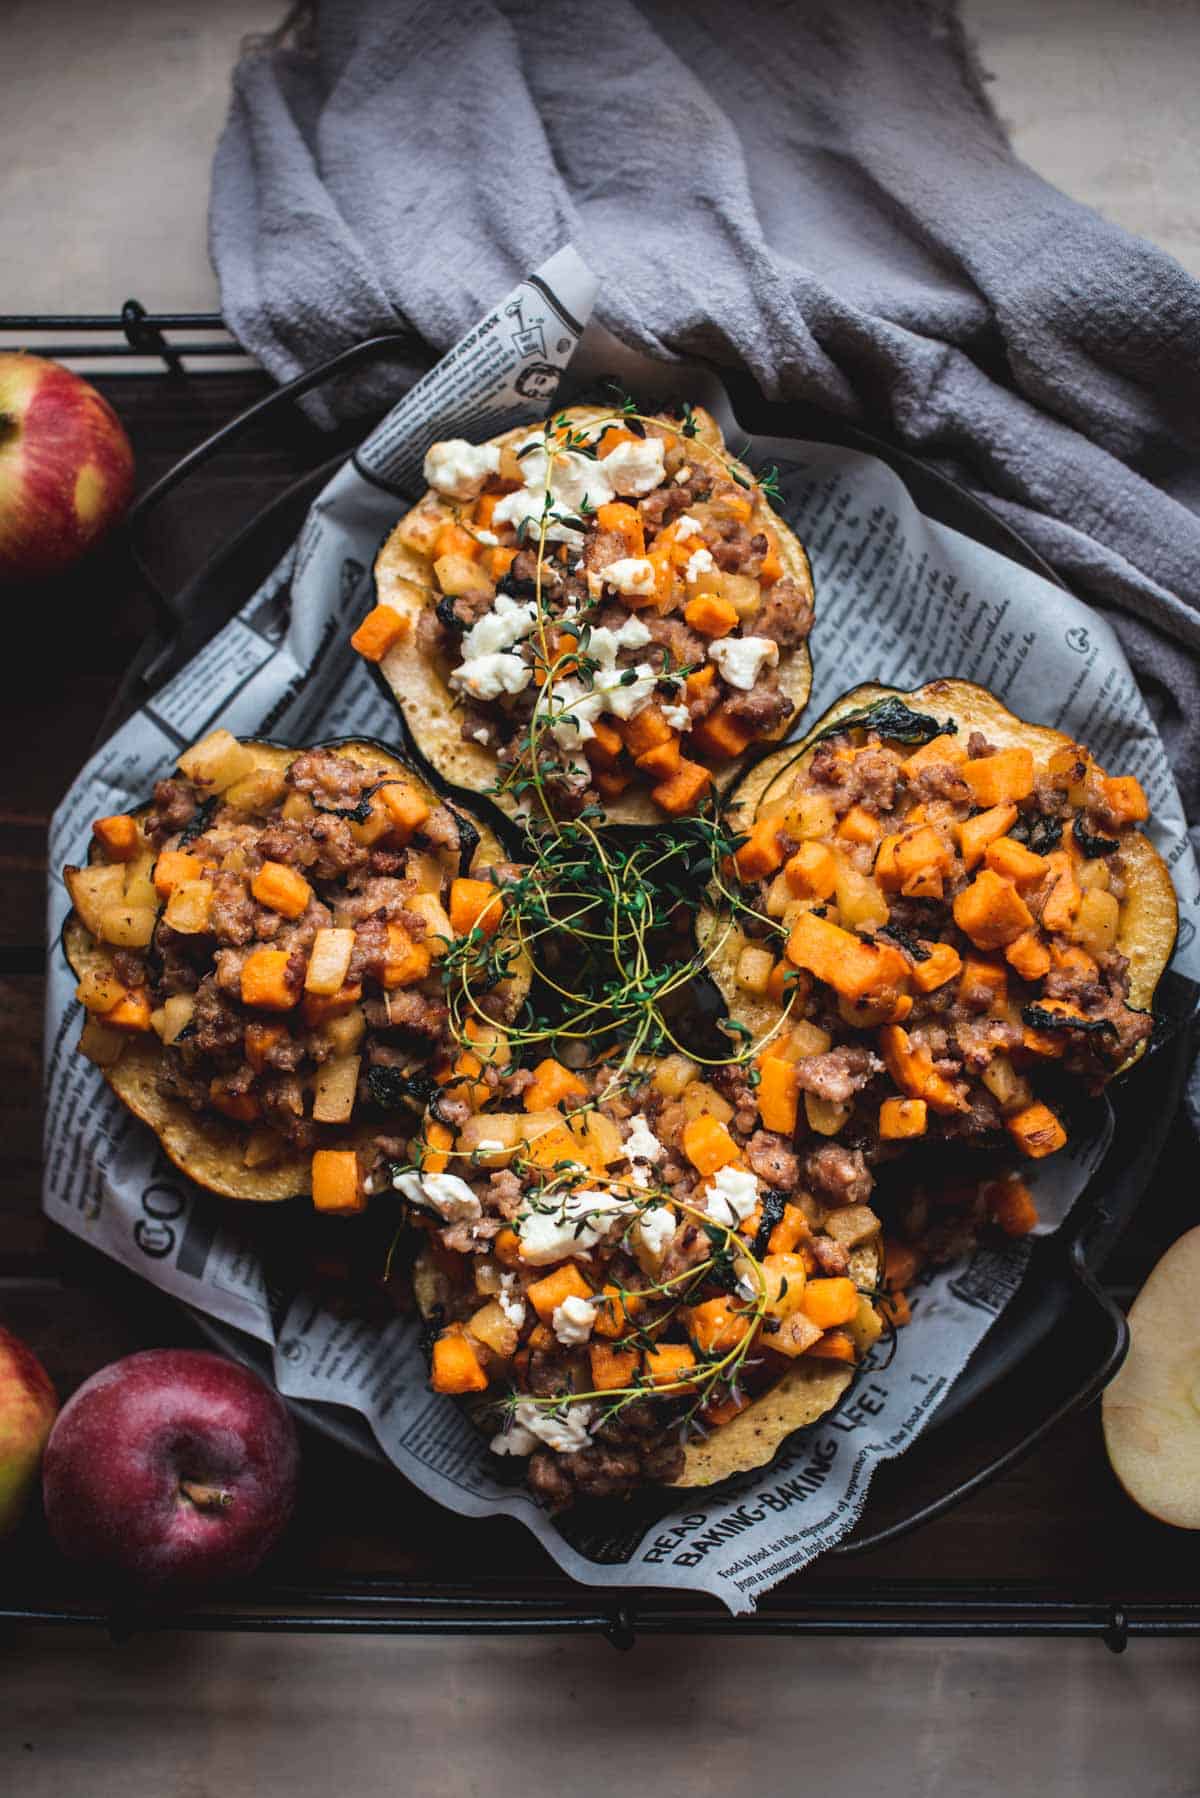 4 half acorn squash stuffed with bright orange ingredients like spiced sausage meat and sweet potato. They are sitting on a newspaper lined plate and have been garnished with some cheese and herbs.